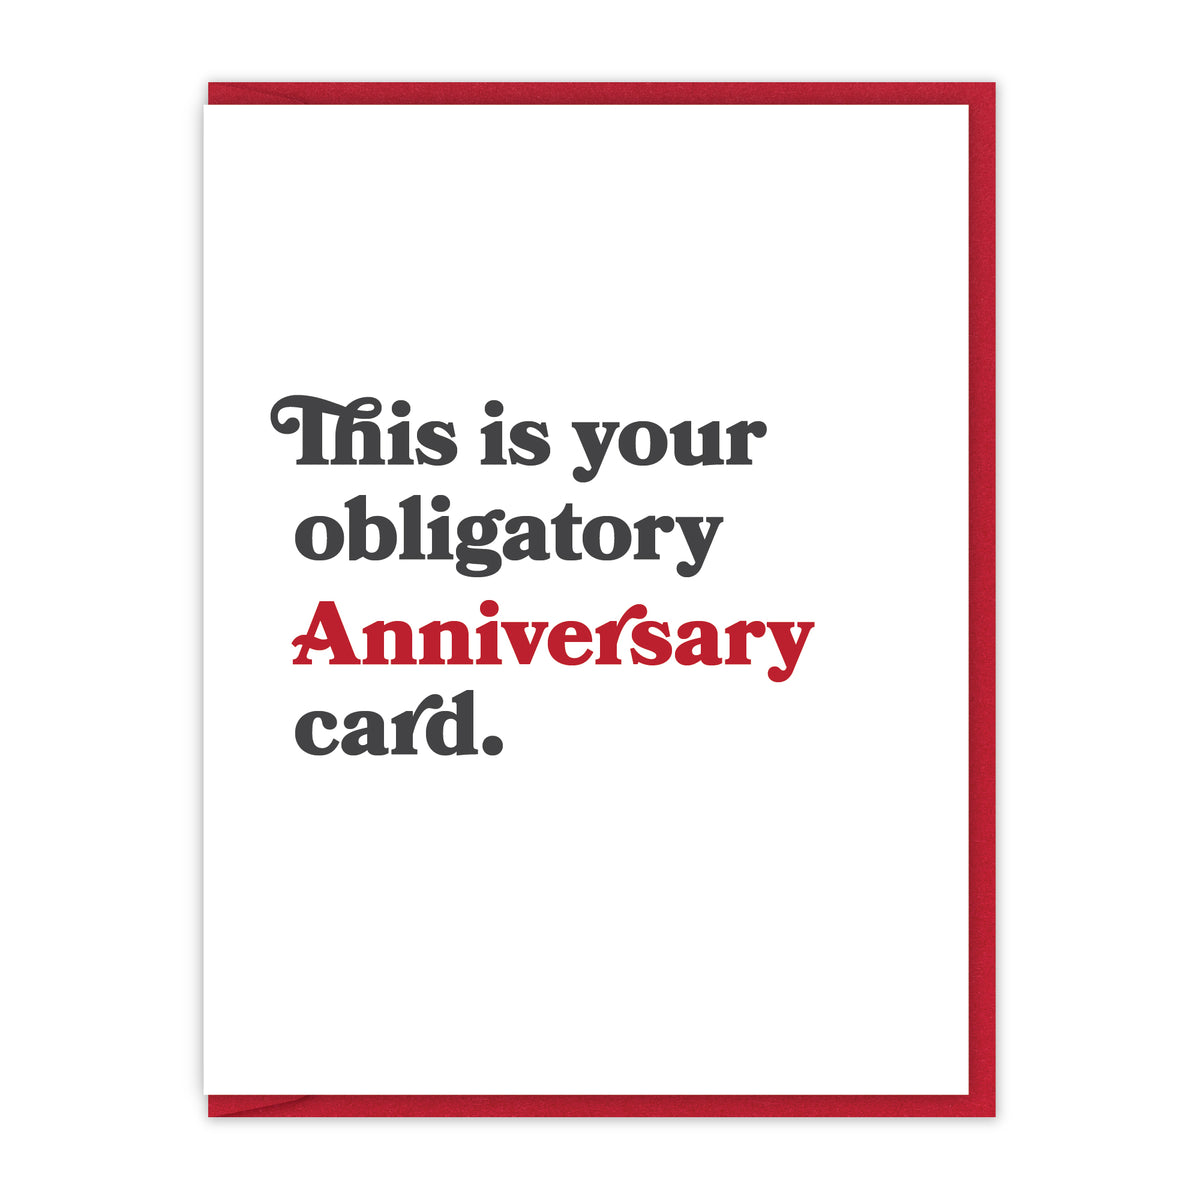 This is your obligatory Anniversary card.